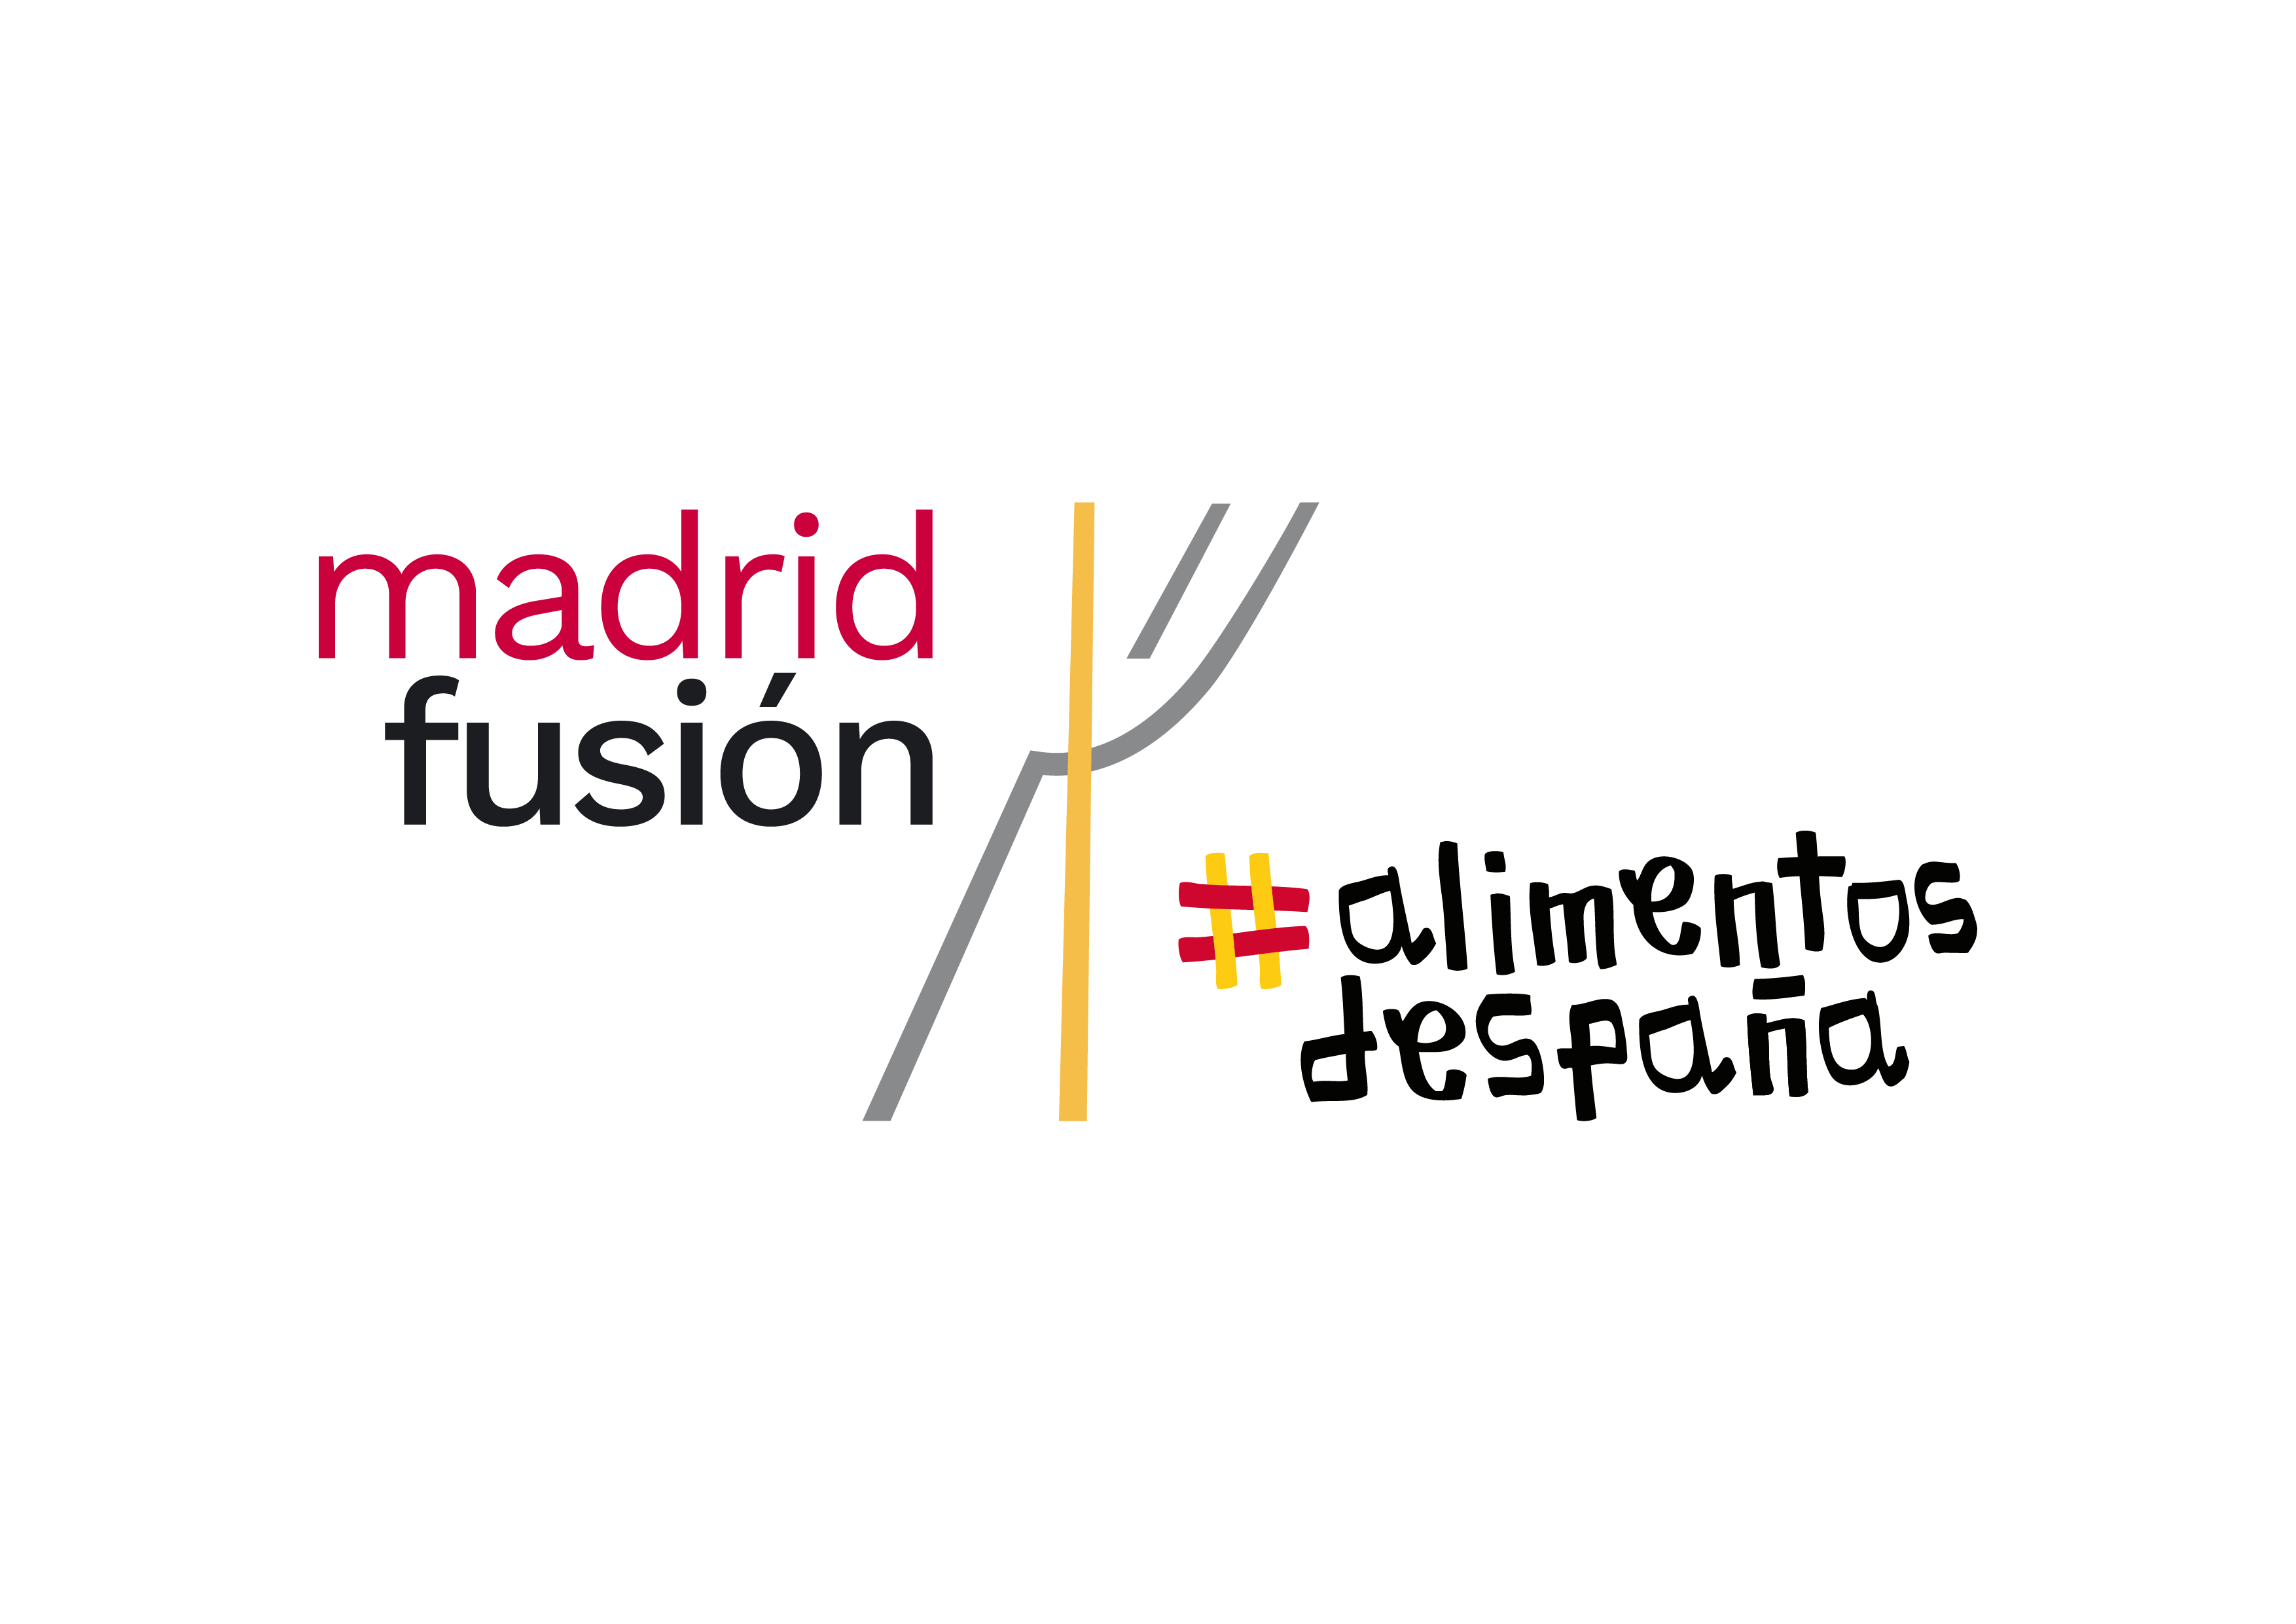 Image 31 of MADRID FUSION LOGO 2021 ALIM ENTOS DE ESPAÑA CMYK 01 in Silestone® awards the “Chef of the Year” to eight renowned chefs at 2021 Madrid Fusion - Cosentino